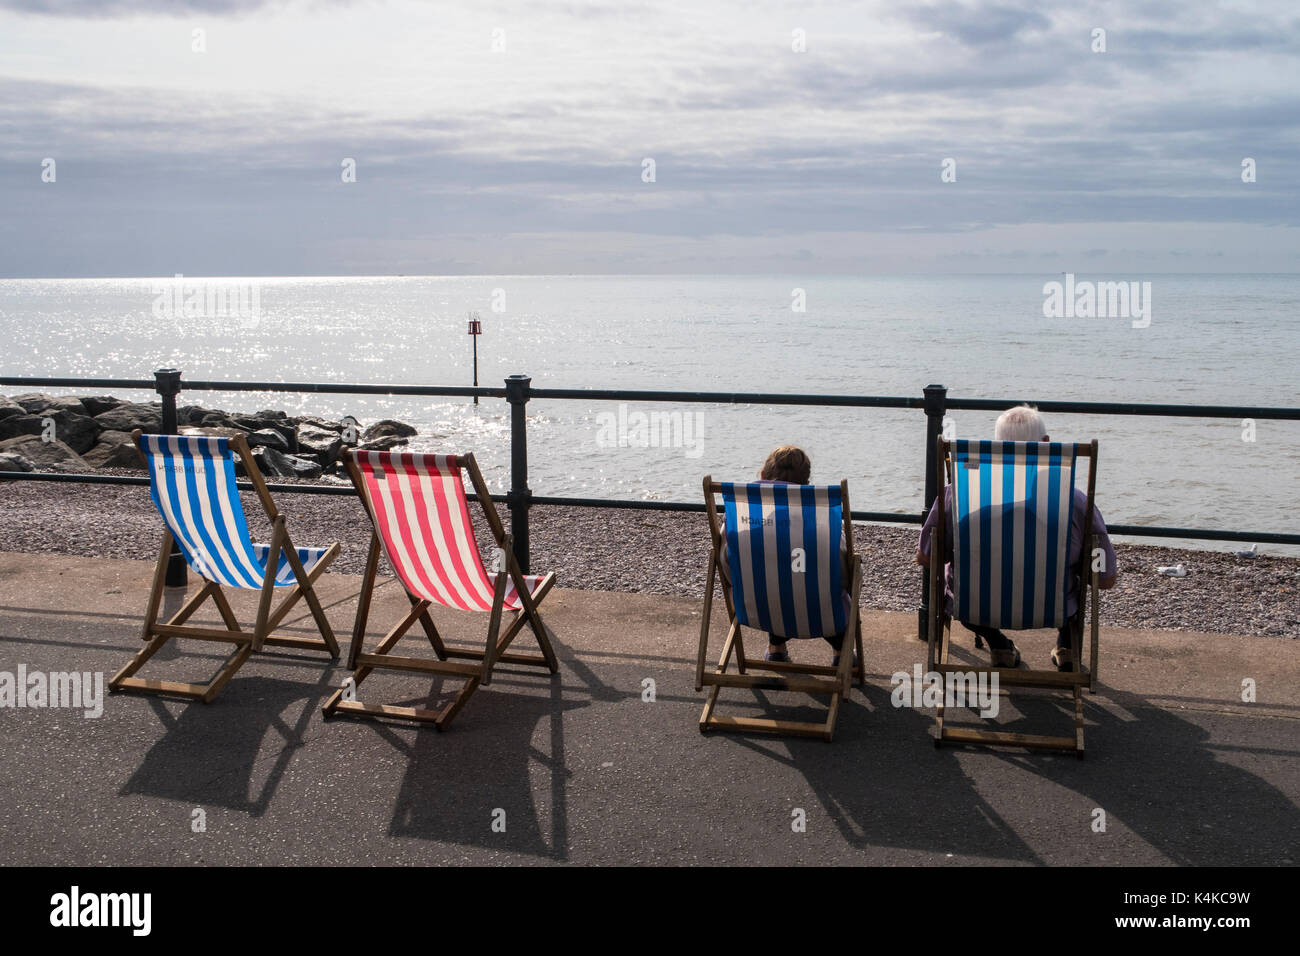 Sidmouth, 7th Sept 17 A sunny but quieter day on Sidmouth Espanade now the the children are all back at school. Photo Central/Alamy Live News Stock Photo